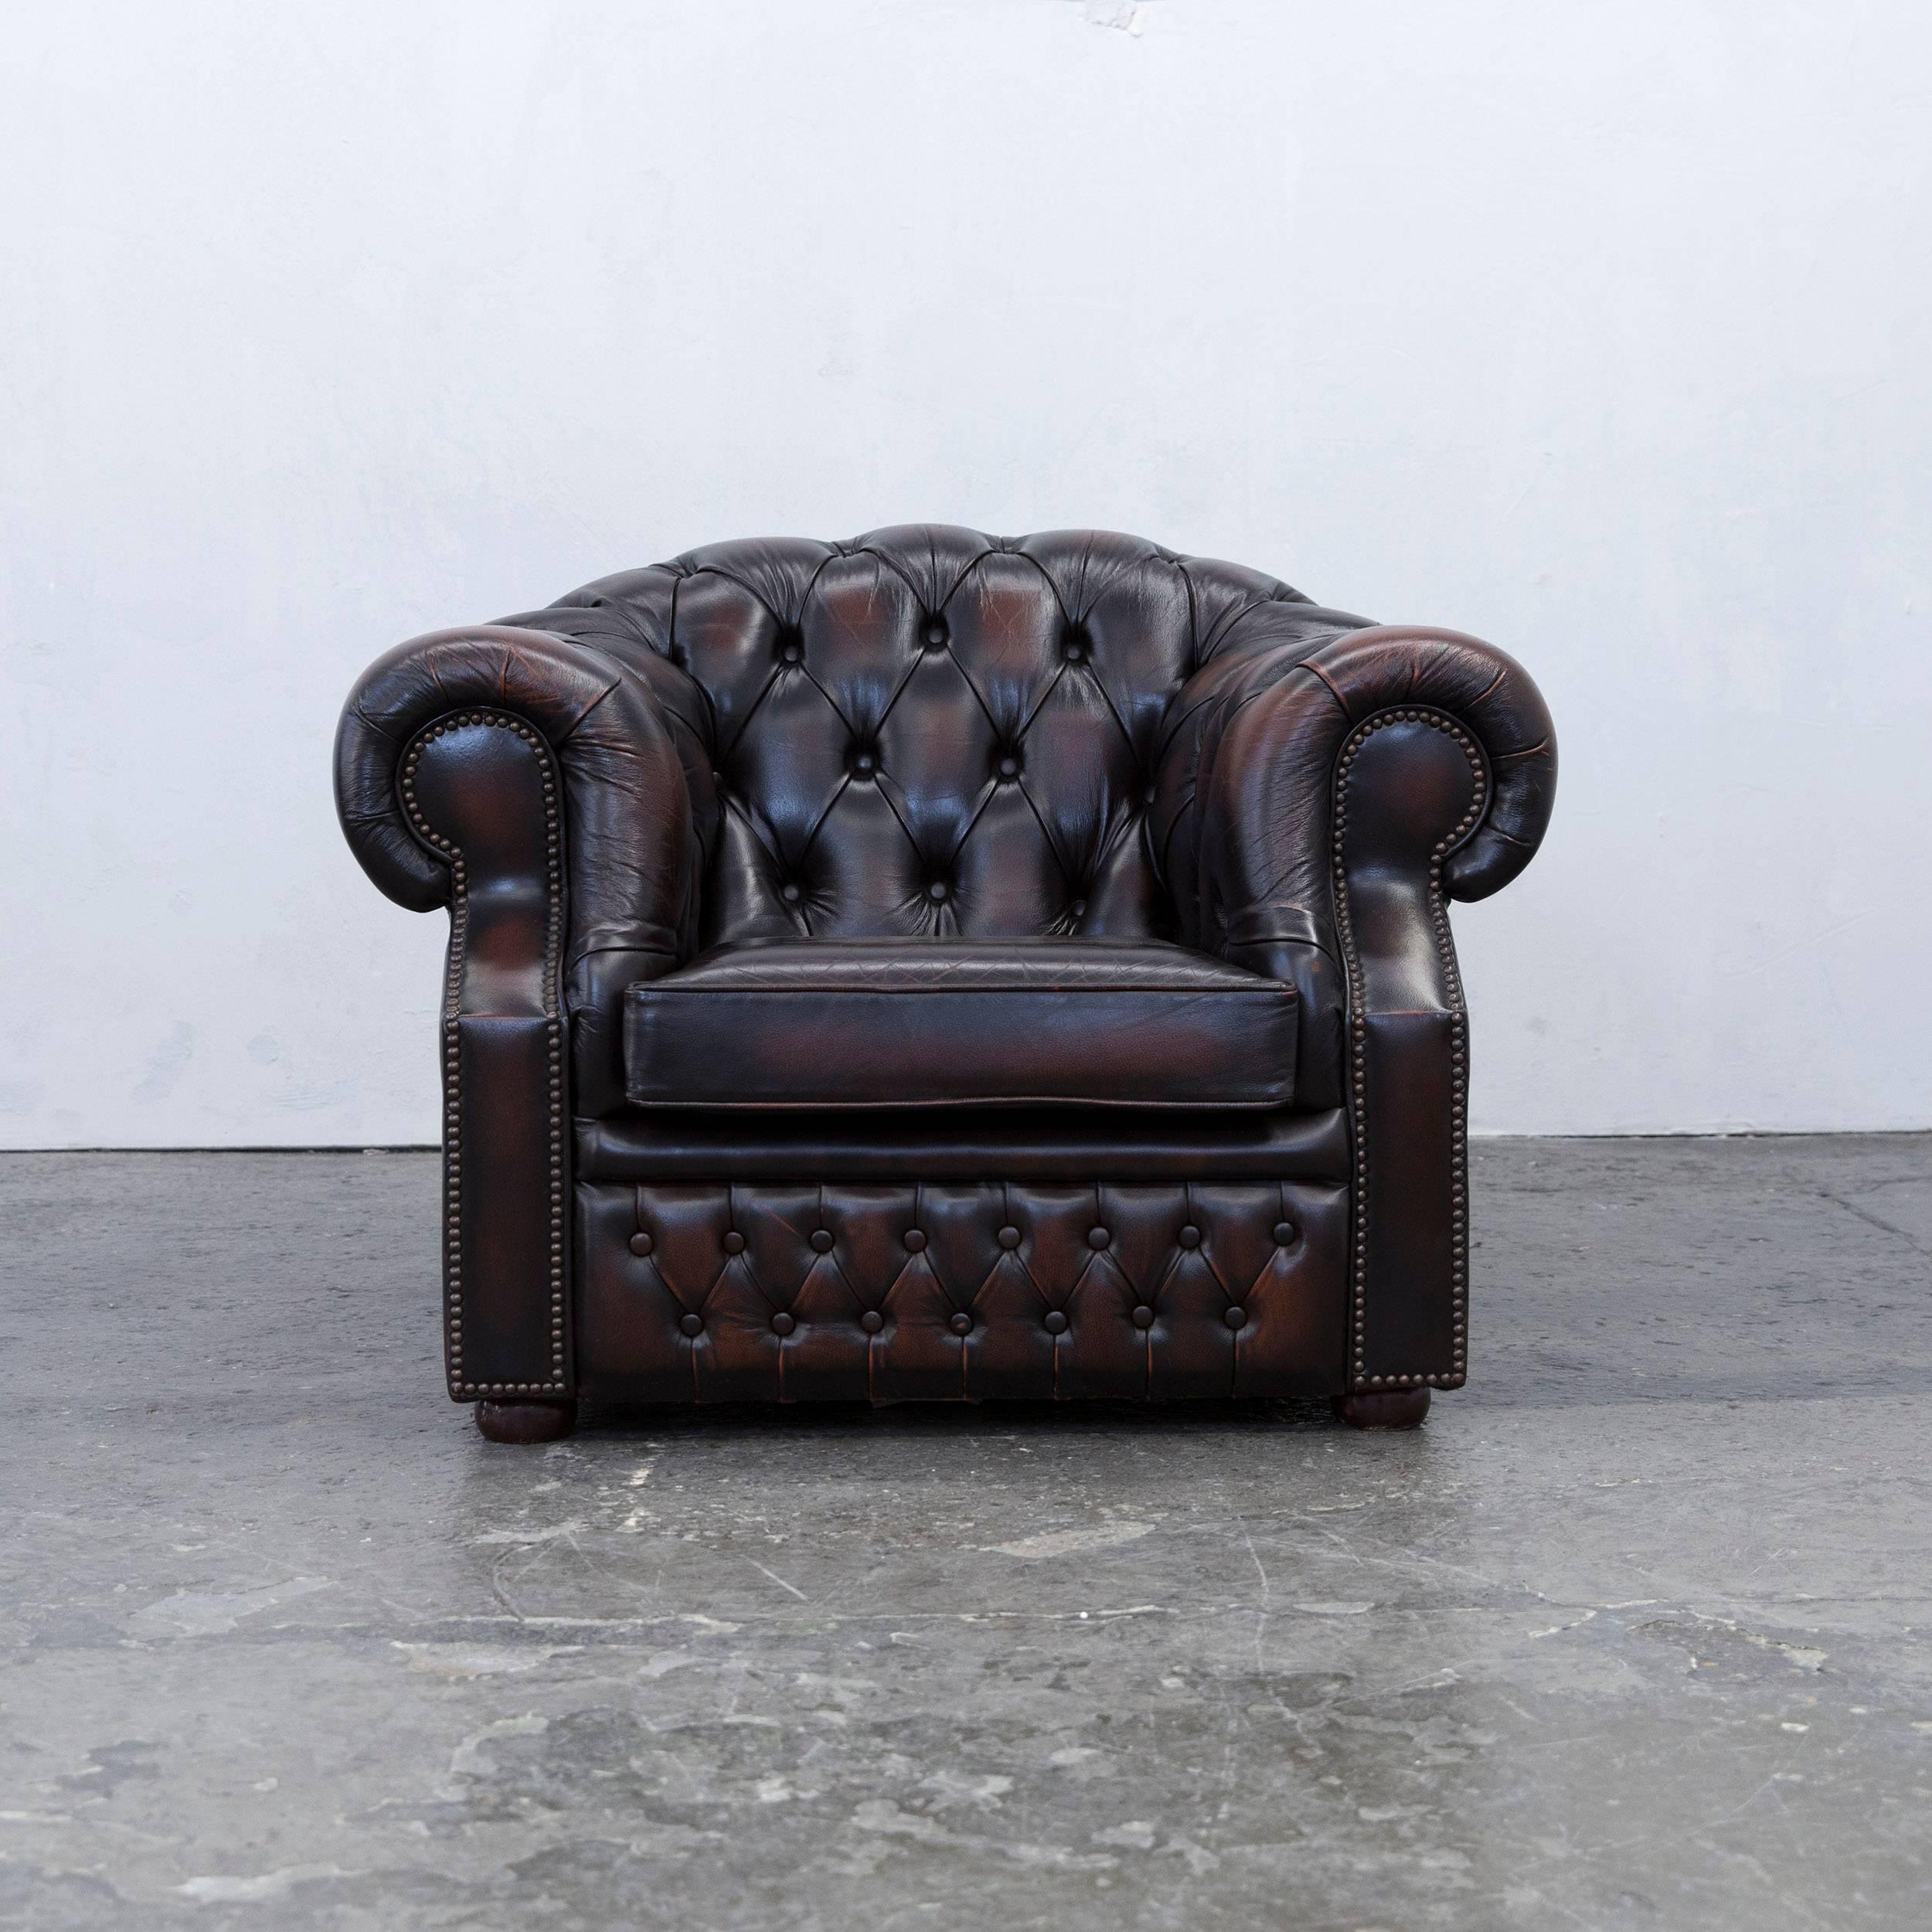 Brown colored original Chesterfield leather armchair in a vintage design, made for pure comfort and elegance.